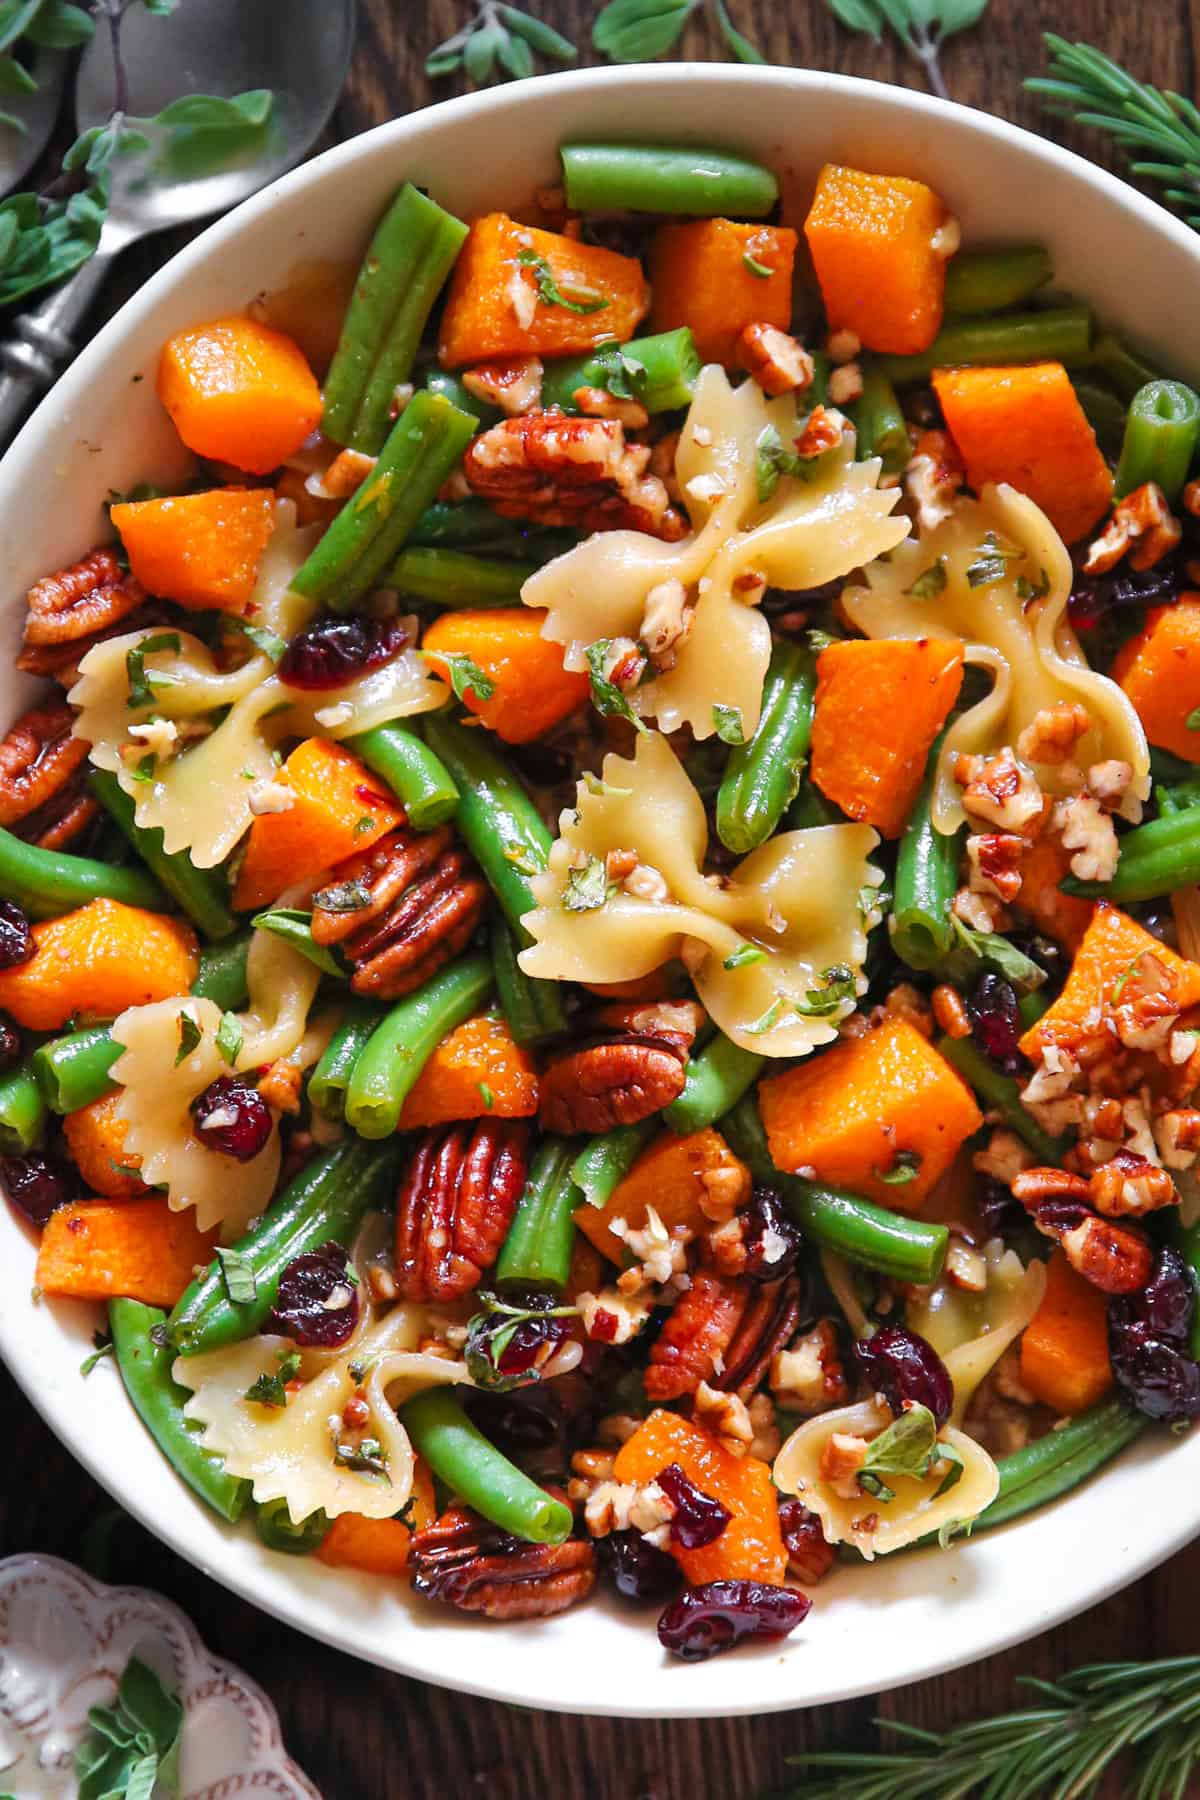 Green Bean Pasta Salad with Roasted Butternut Squash, Pecans, Bow-Tie Pasta, and Dried Cranberries - in a white bowl.